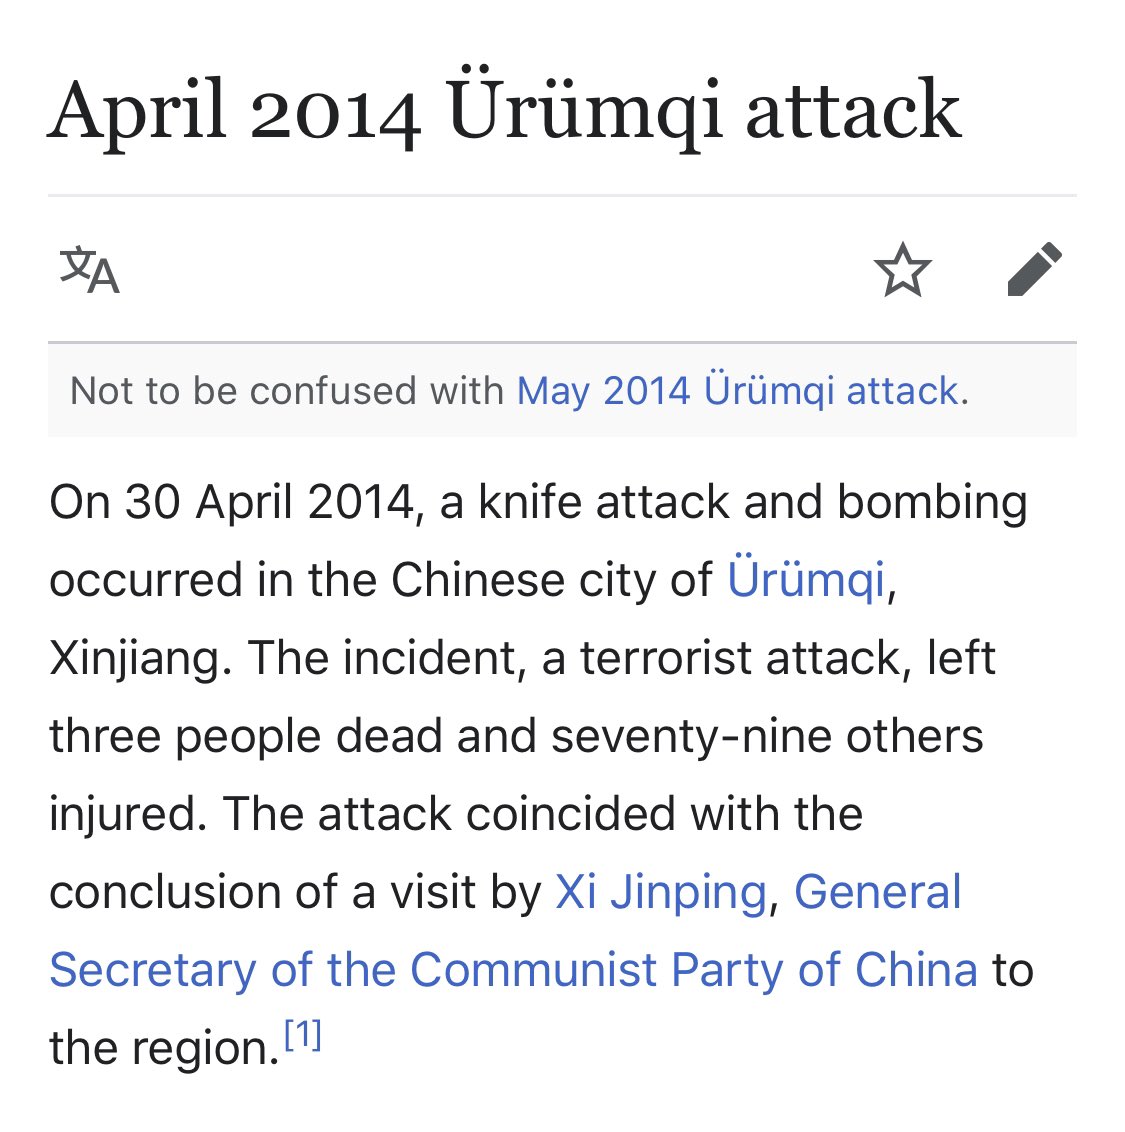 Immediately after April 30th 2014 bombing by Al Qaeda affiliate Turkestan Islamic Party at Urumqi train station that targeted seasonal Han migrant workers coming to  #Xinjiang to pick cotton, then  @HRW’s  @bequelin said the bombing was “powerful symbol” of anti-colonial struggle